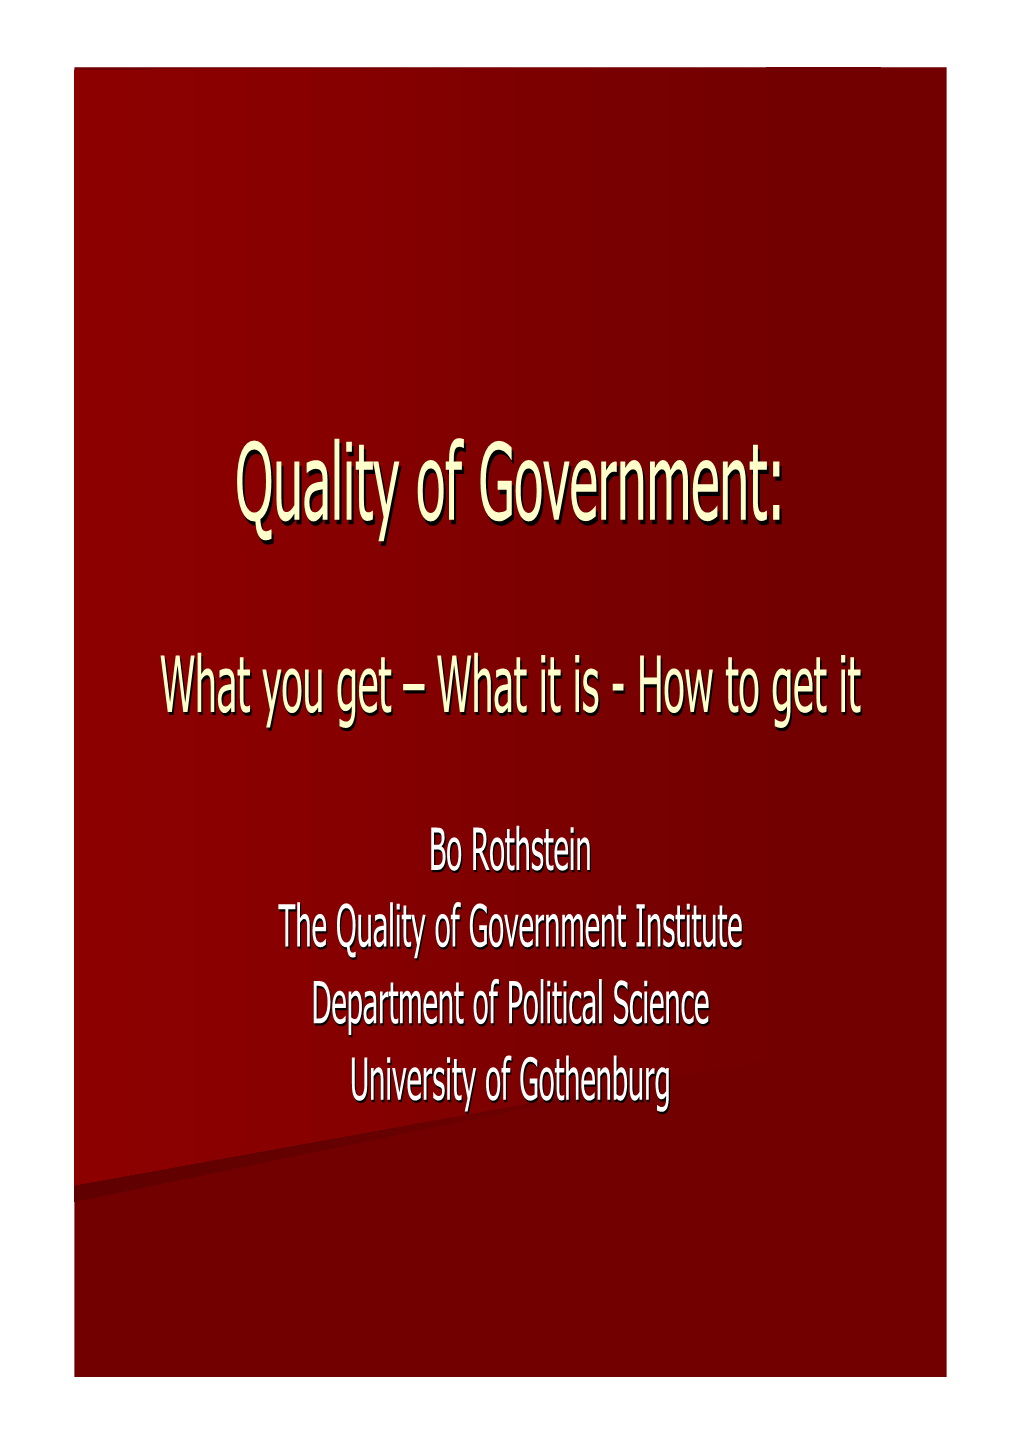 What Is Quality of Governance